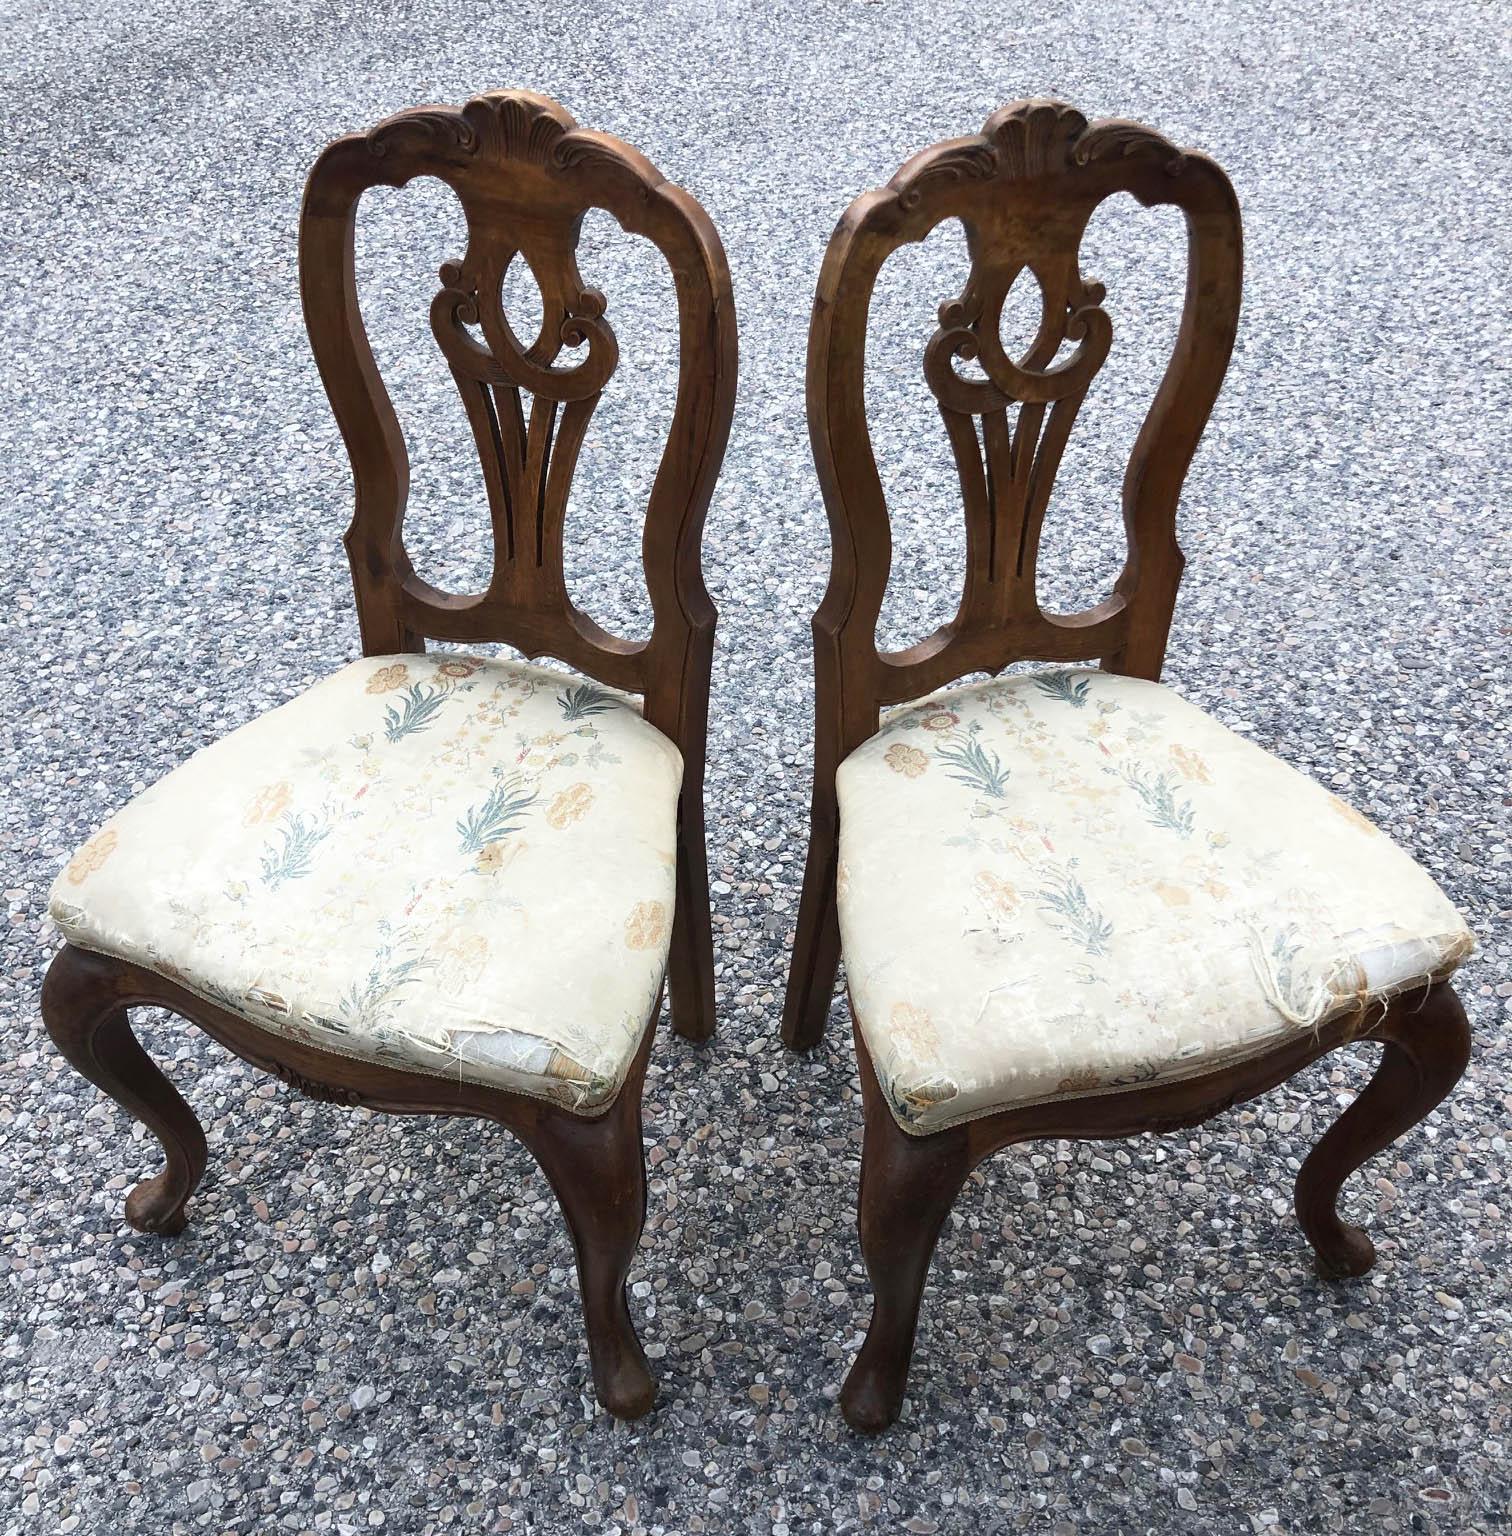 1920s pair of armchairs in solid walnut, with upholstery to be redone, very elegant and heavy.
They will be delivered in a specific wooden case for export, packed in bubble wrap.
Comes from an old country house in the Florence area of Tuscany.
The